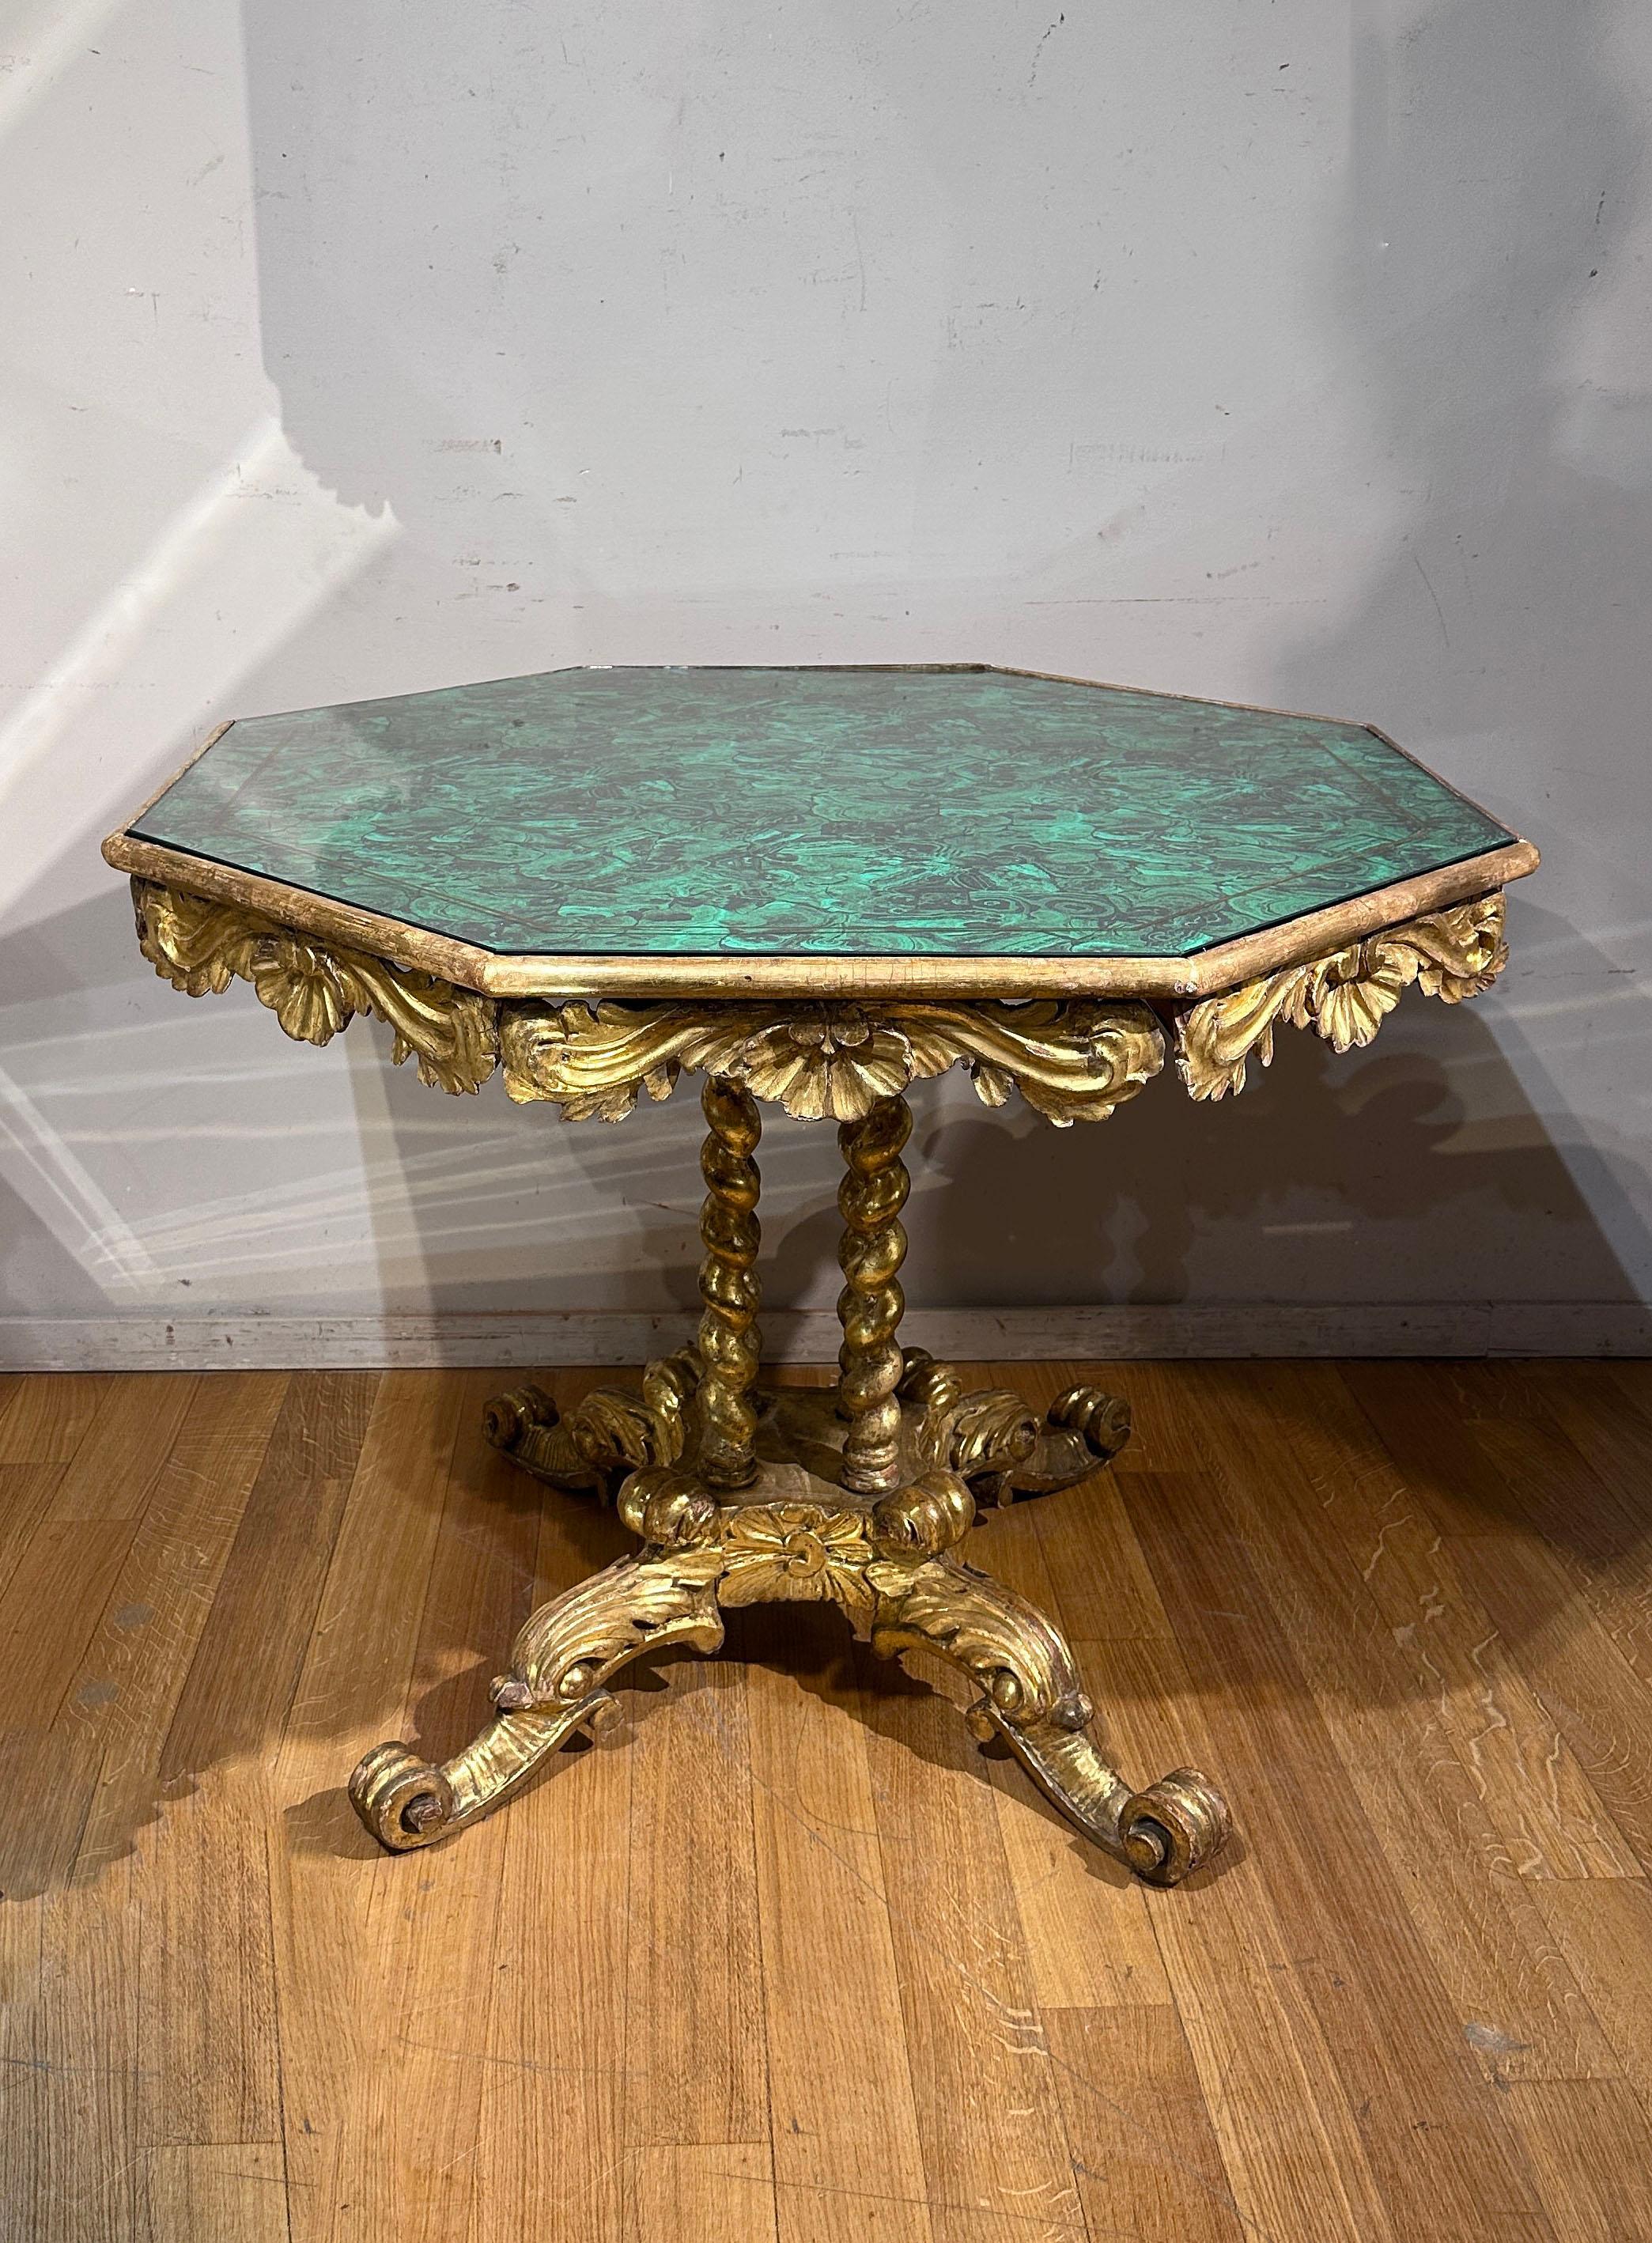 This coffee table carved in pine wood and gilded with pure gold leaf is a truly elegant piece of art. Its Italian manufacturing from the early 19th century (ca. 1820) testifies to its historical and artistic value. The coffee table has four curly